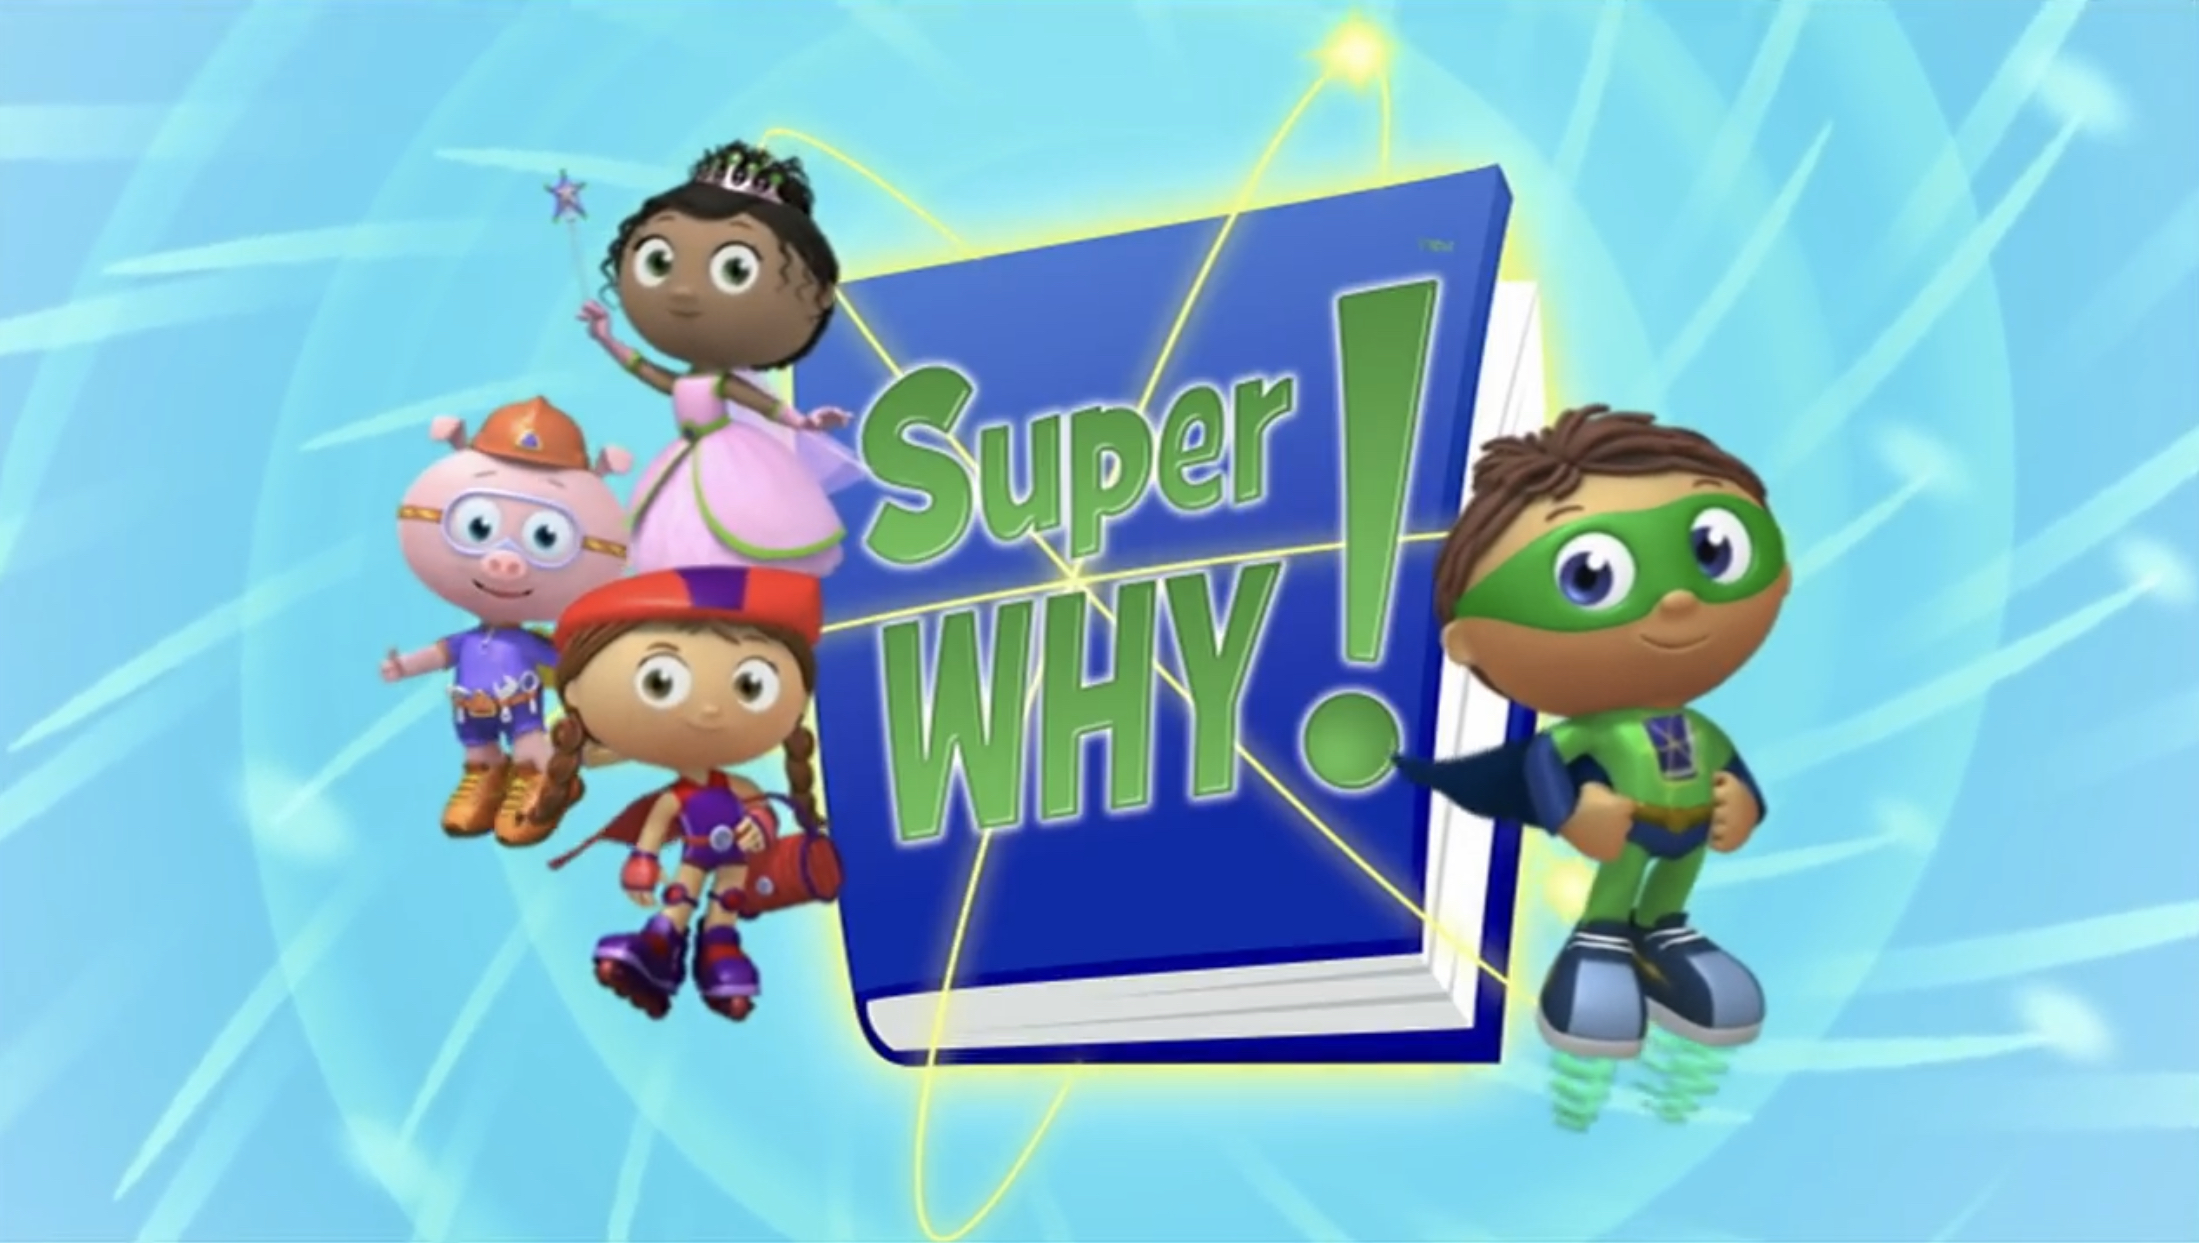 Super Why UK Dub Episode 8 and 37 - Super Why! (partially found British dub of PBS Kids CGI animated series; late 2000s-2010s)